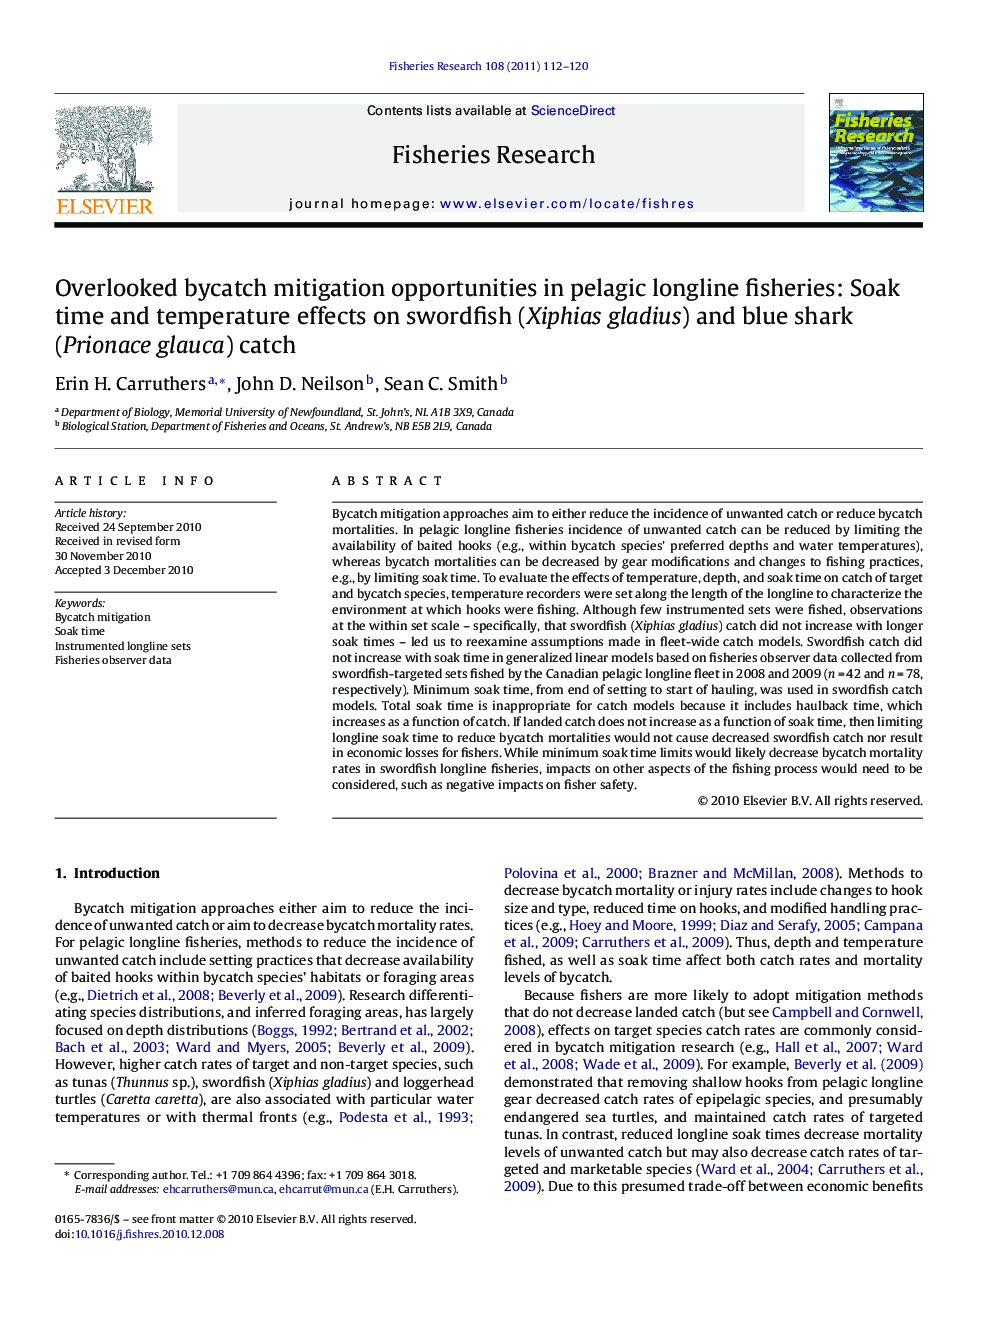 Overlooked bycatch mitigation opportunities in pelagic longline fisheries: Soak time and temperature effects on swordfish (Xiphias gladius) and blue shark (Prionace glauca) catch